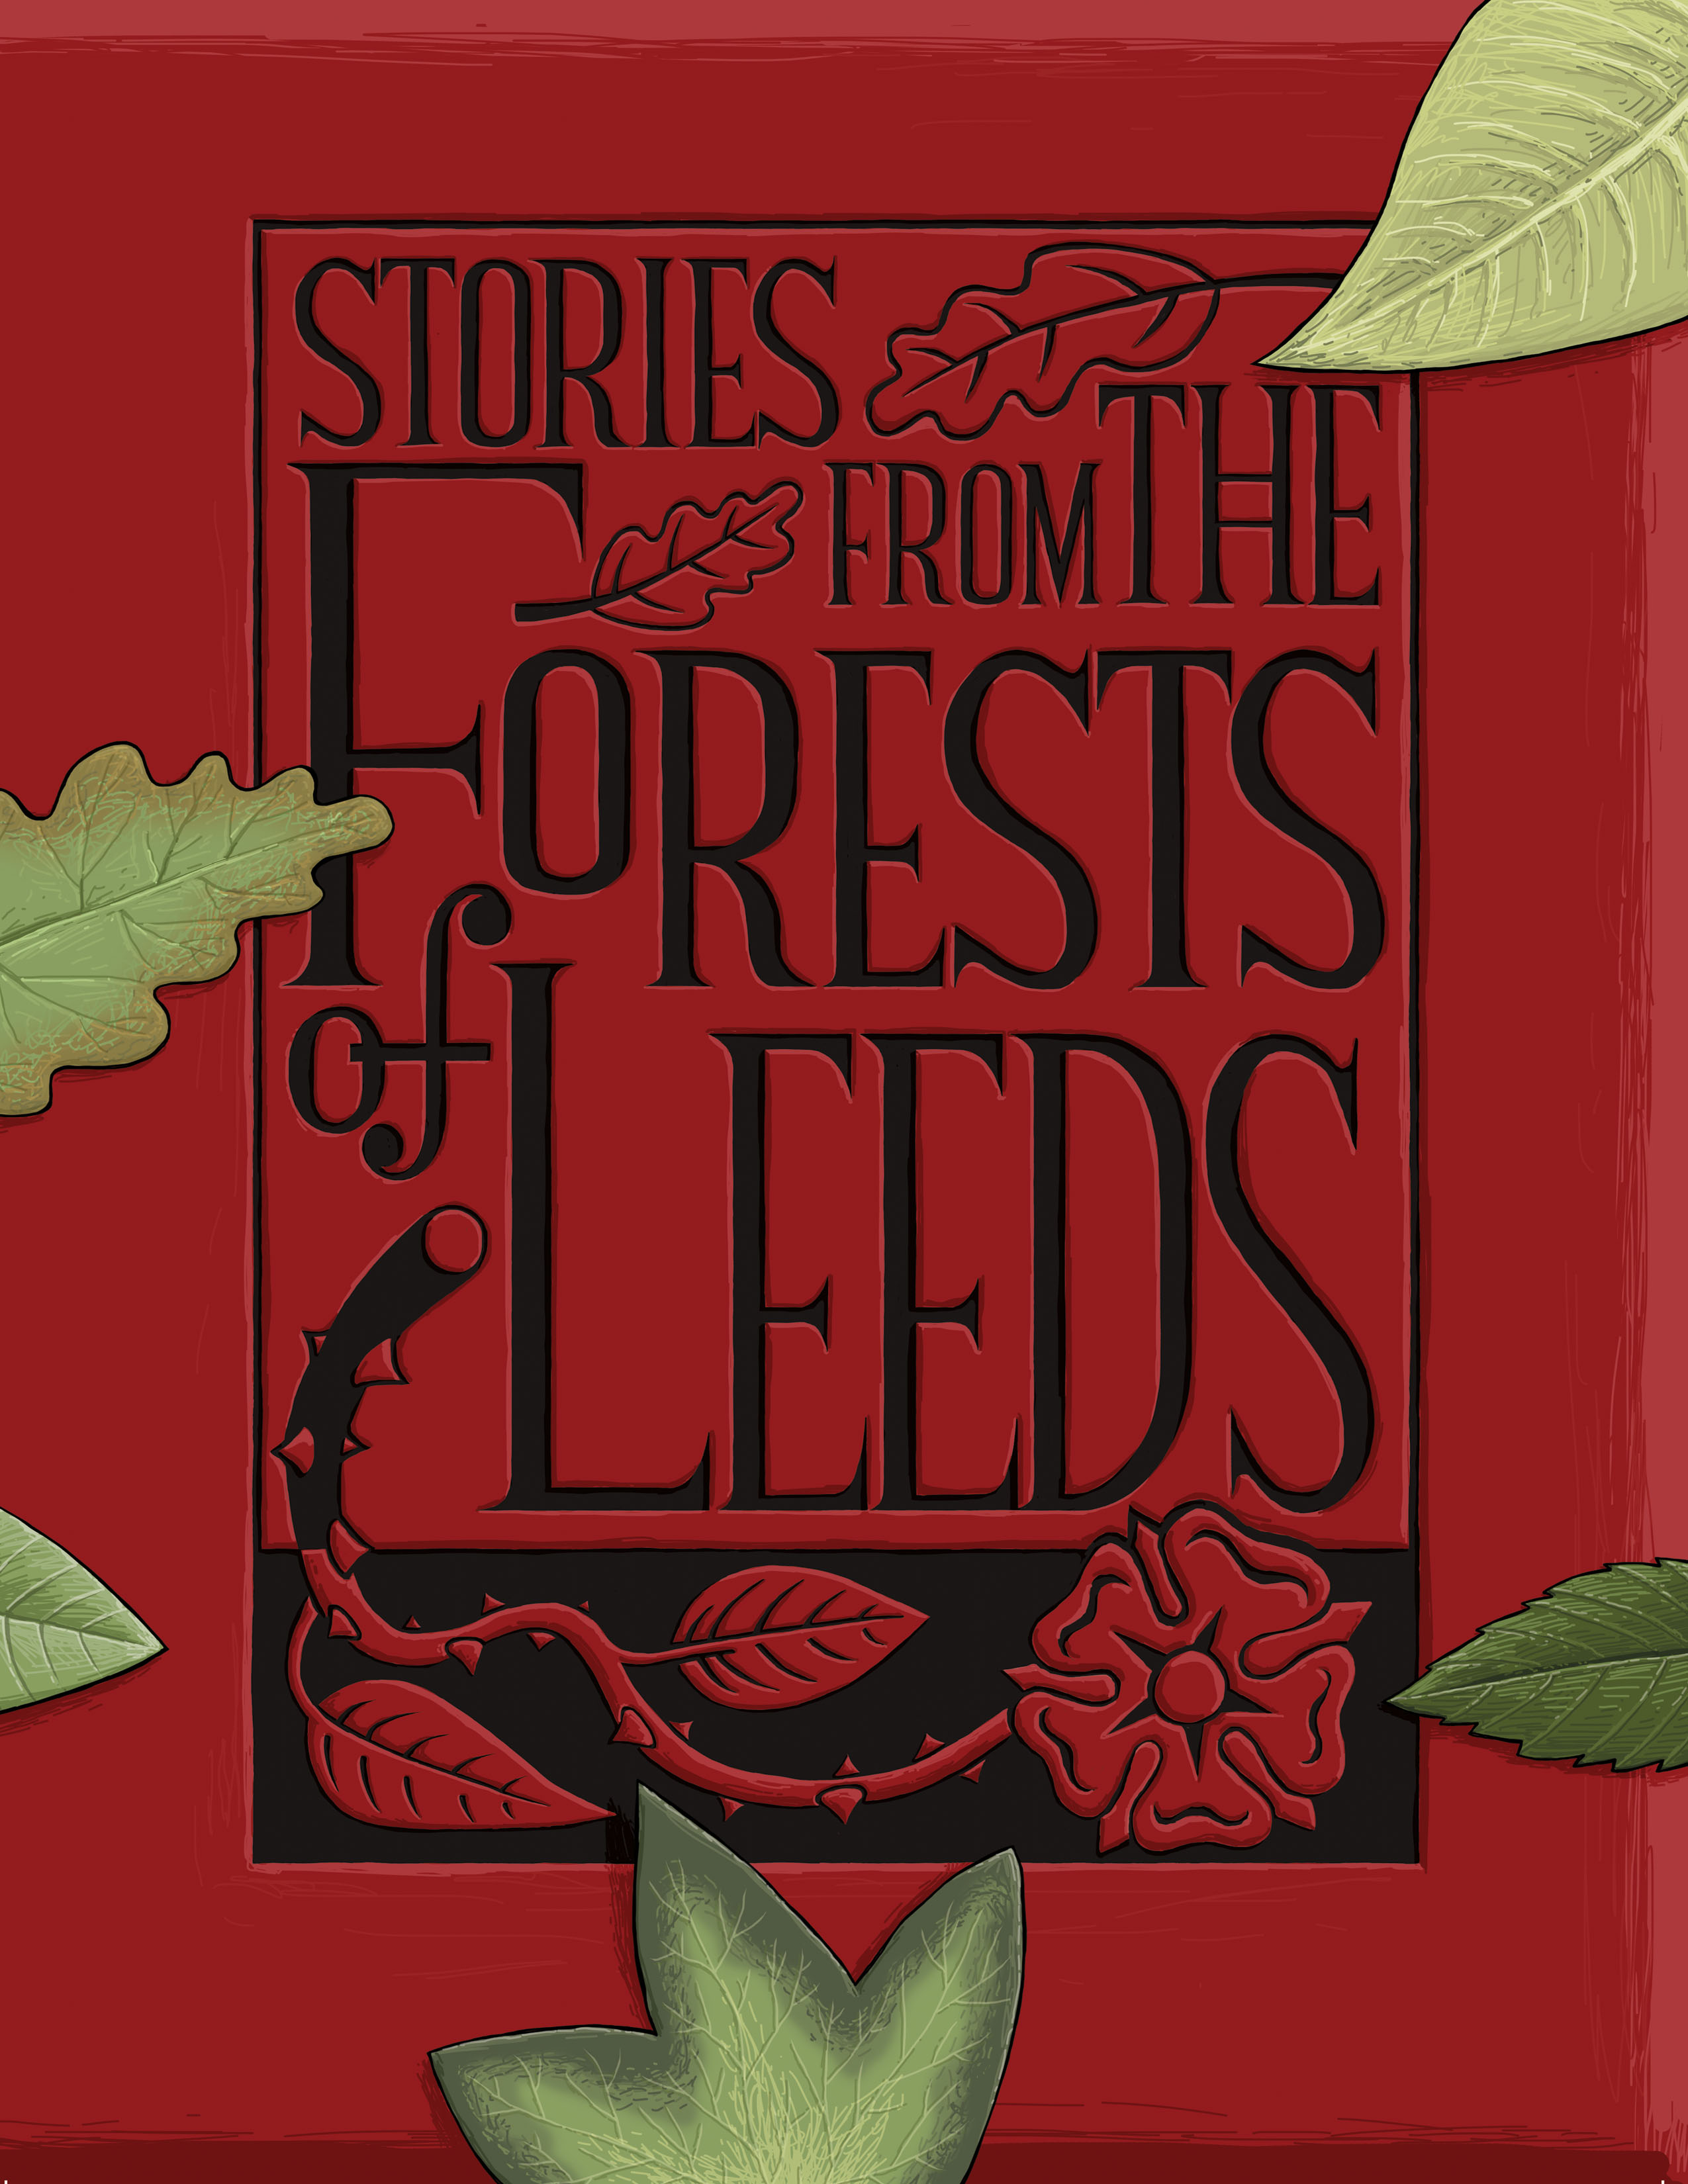 Stories from the Forests of Leeds